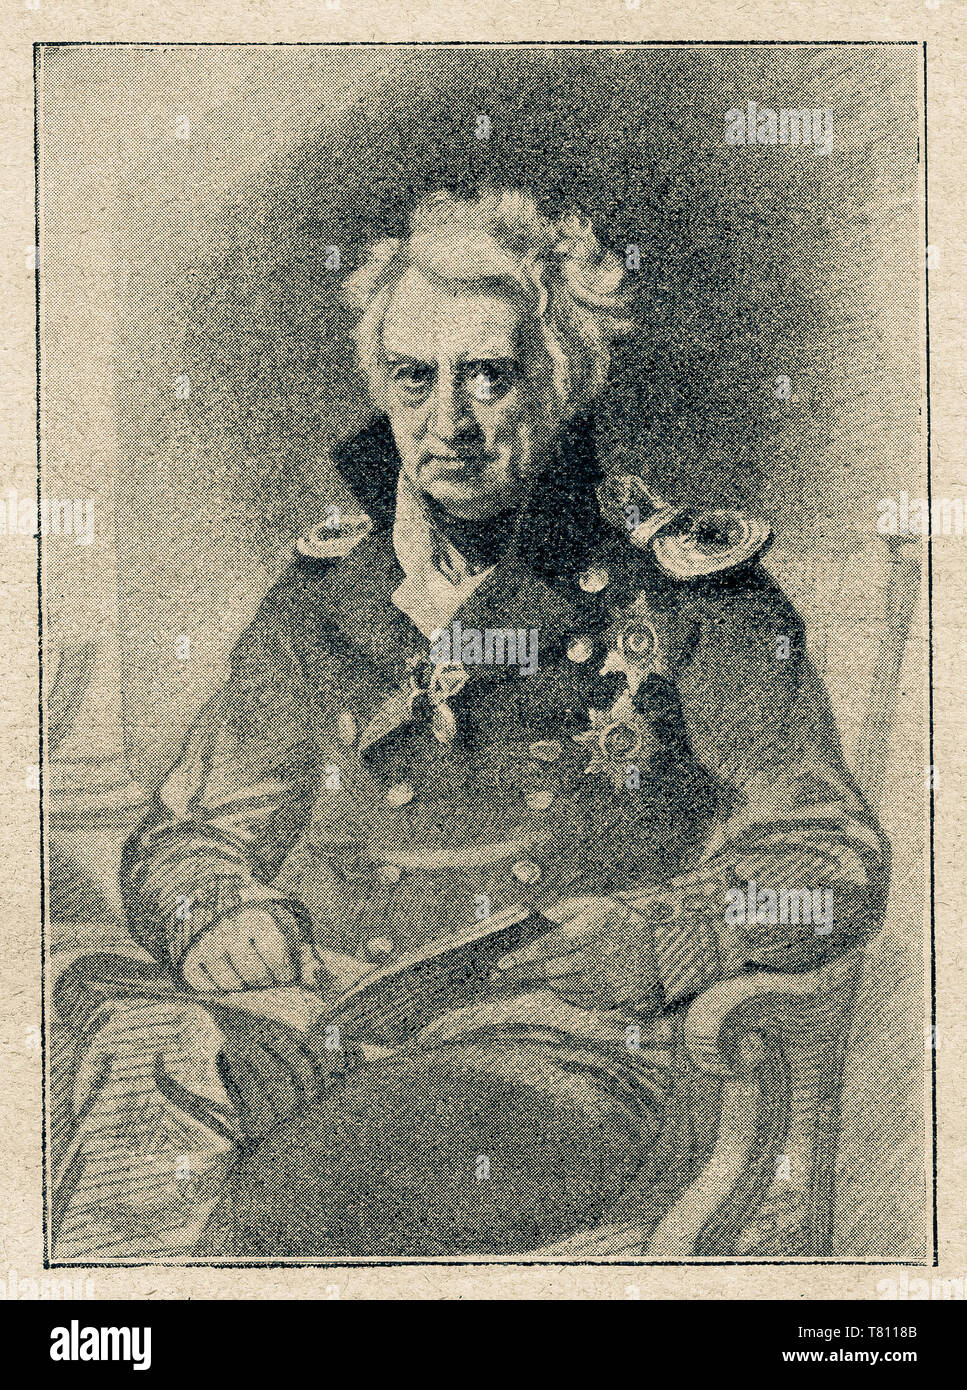 Alexander Shishkov - military and statesman, admiral. Secretary of State and Minister of Public Education. One of the leading Russian ideologues of the Patriotic War of 1812..Illustrated overview of the life of mankind in the 19th century, 1901 edition, Marx publishing house, St. Petersburg Stock Photo